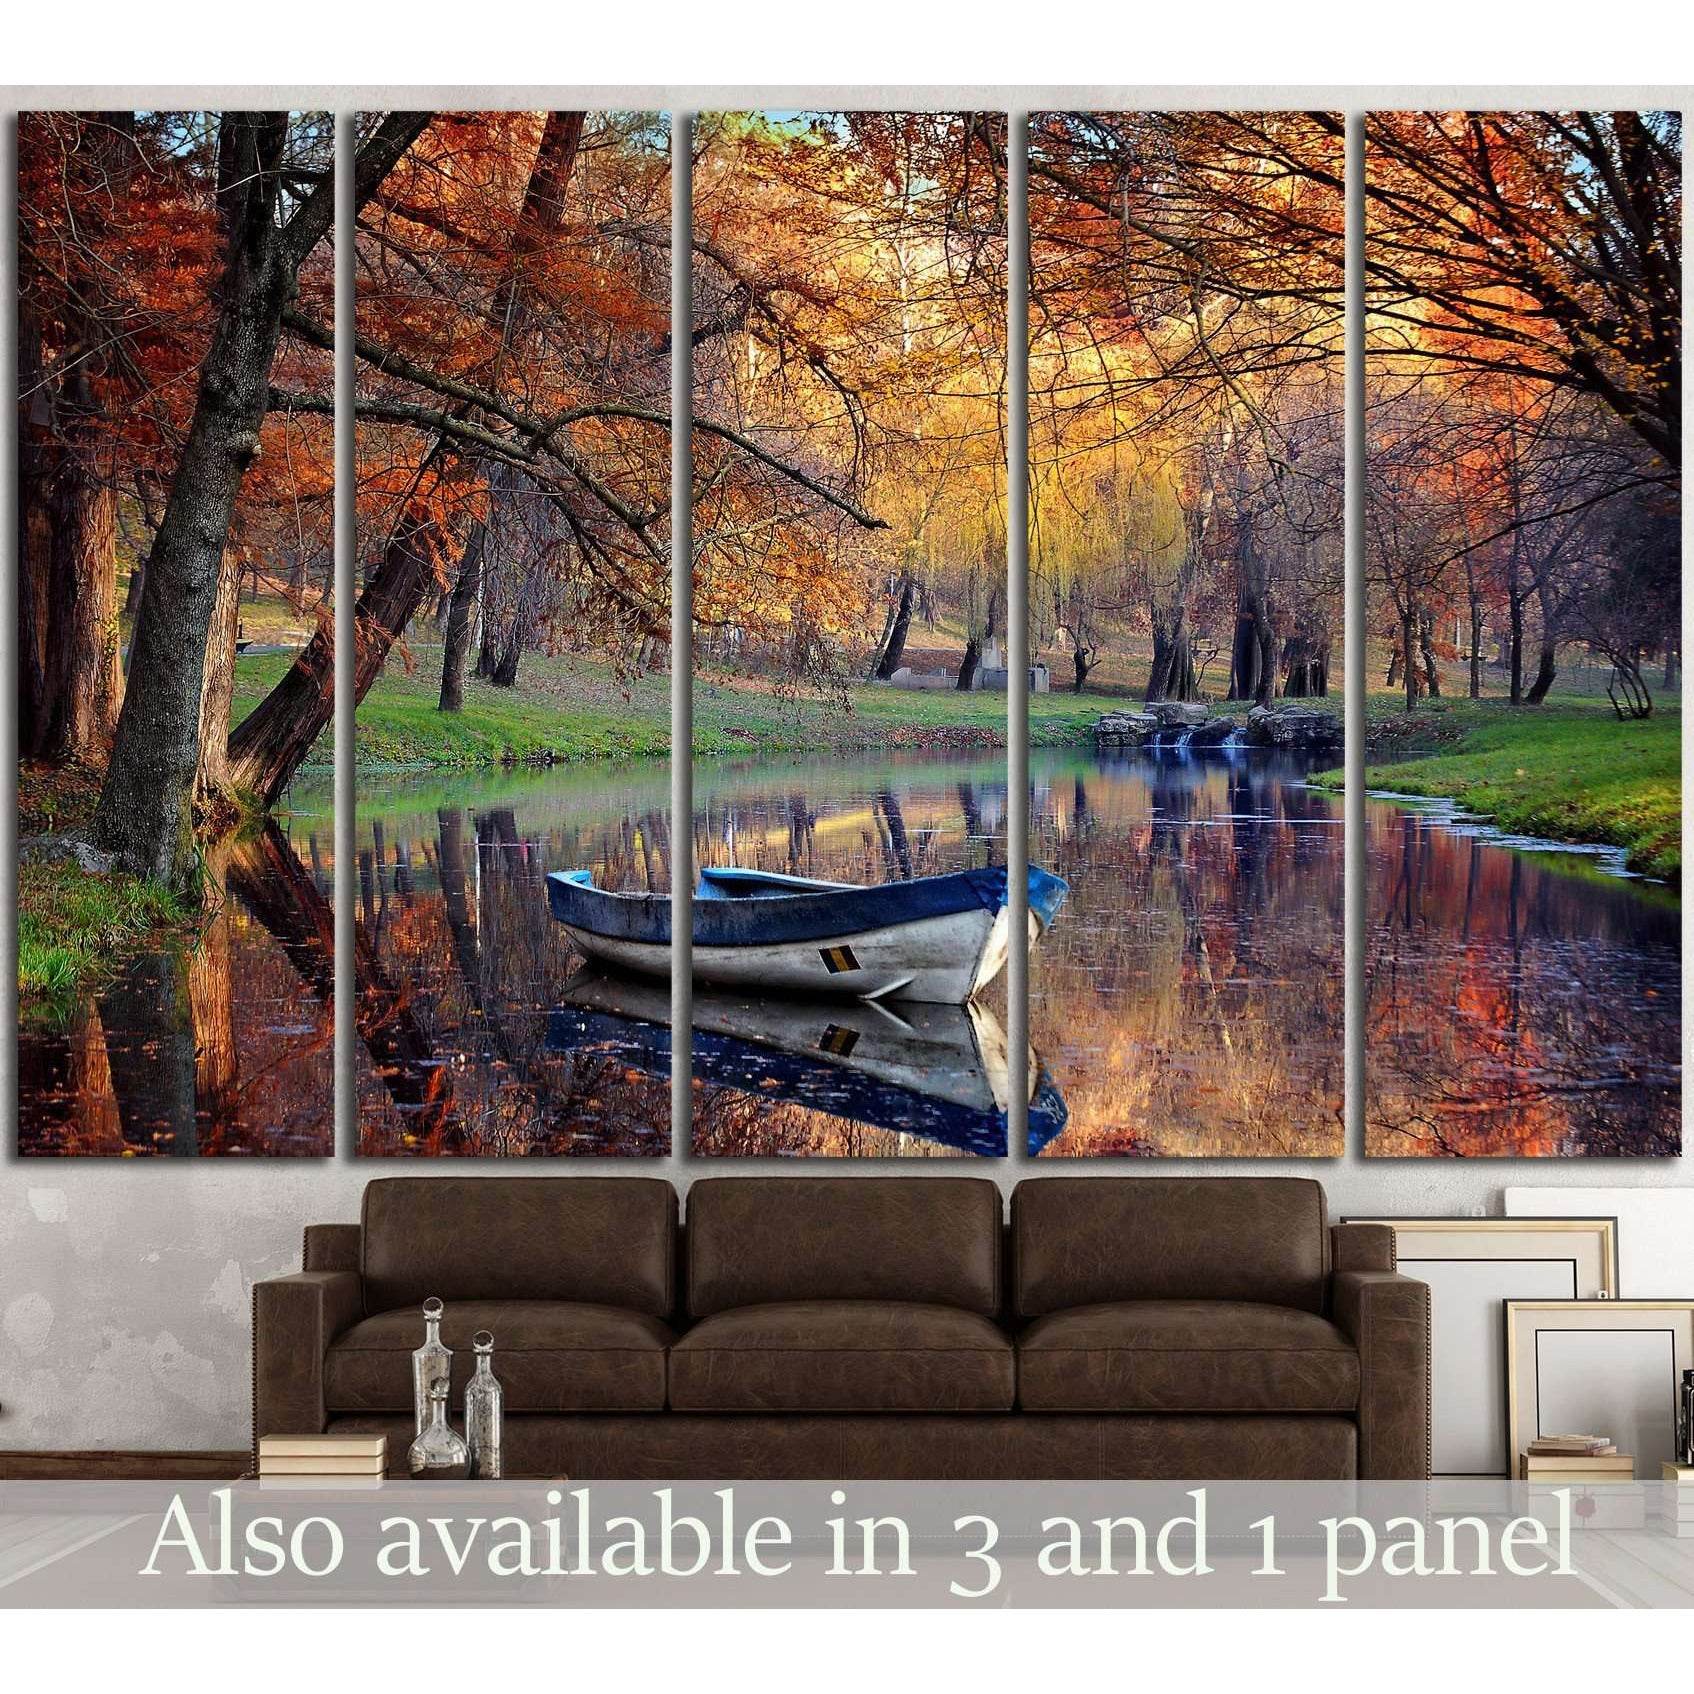 Colorful autumn landscape №850 Ready to Hang Canvas Print